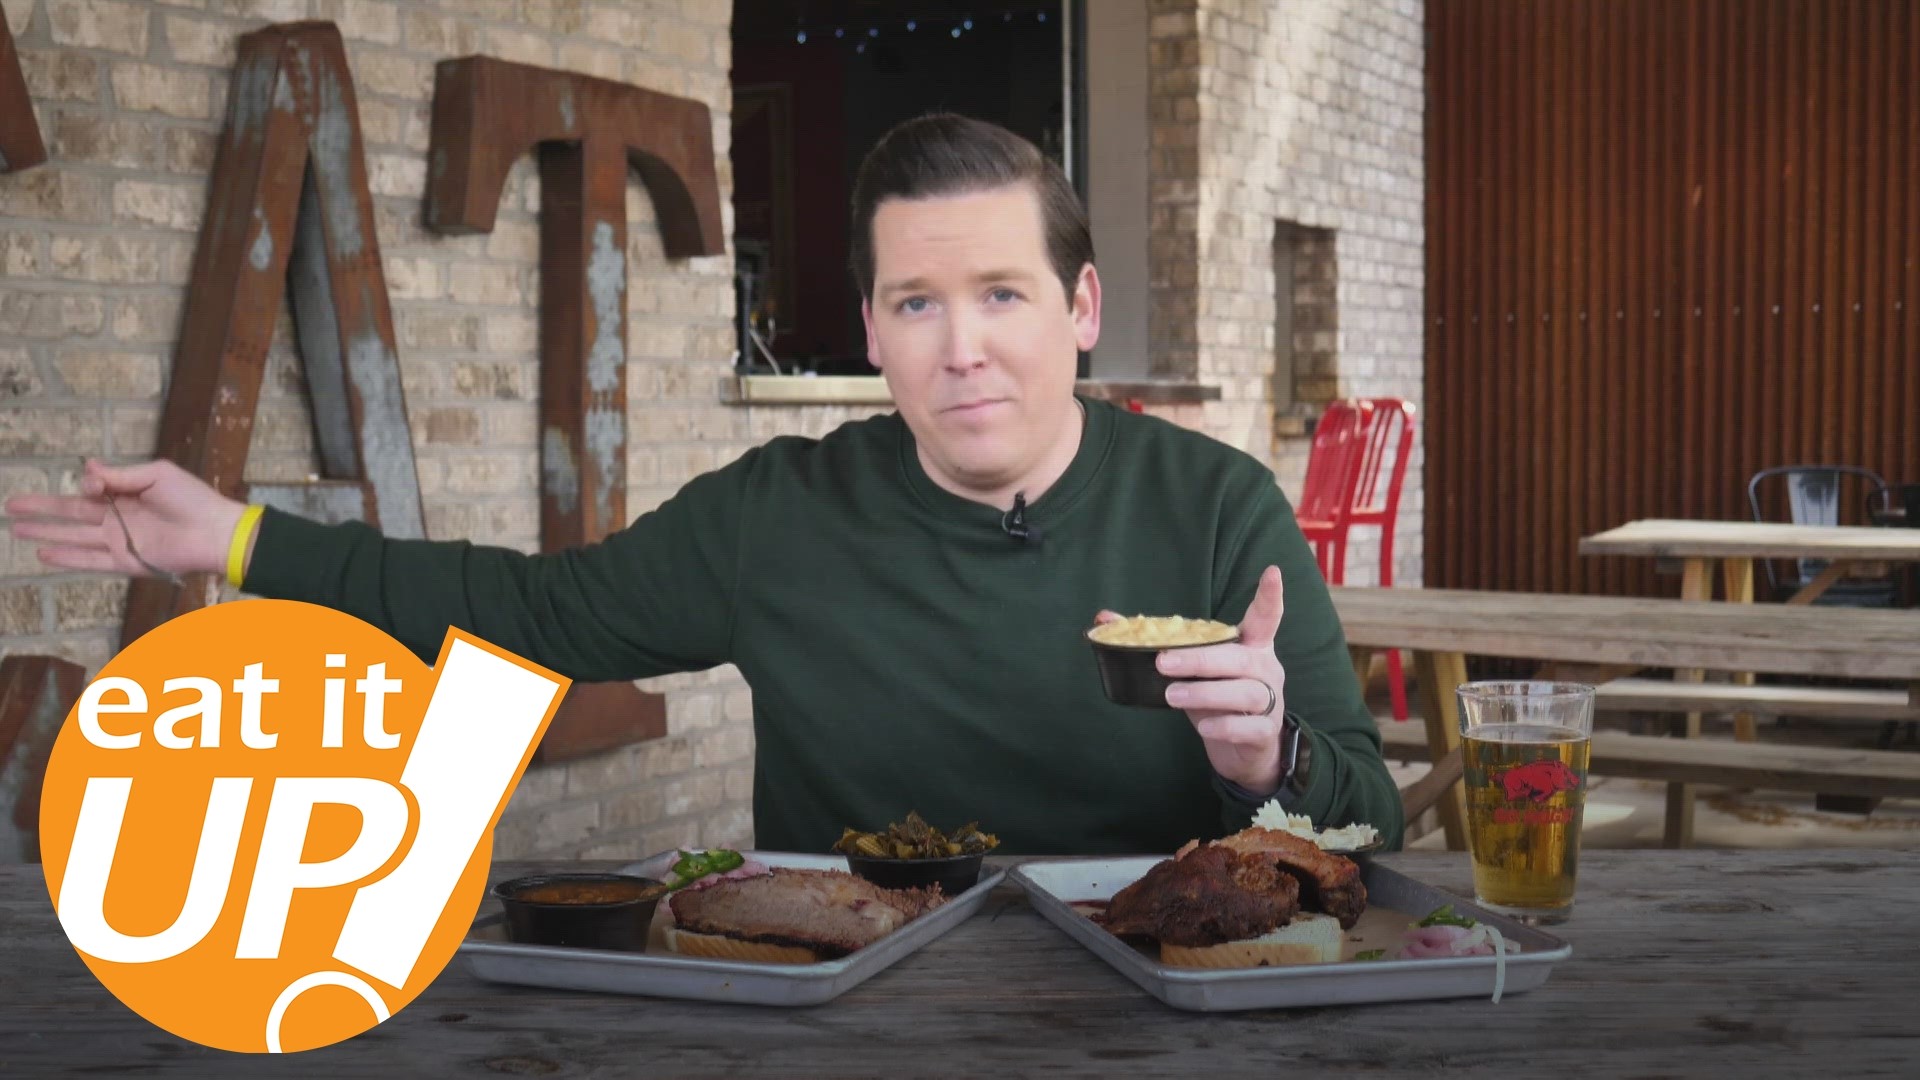 On this week's Eat It Up, Hayden Balgavy visits Count Porkula at the Crossroads in midtown Little Rock, where you can find delicious BBQ and plenty of unique sides.